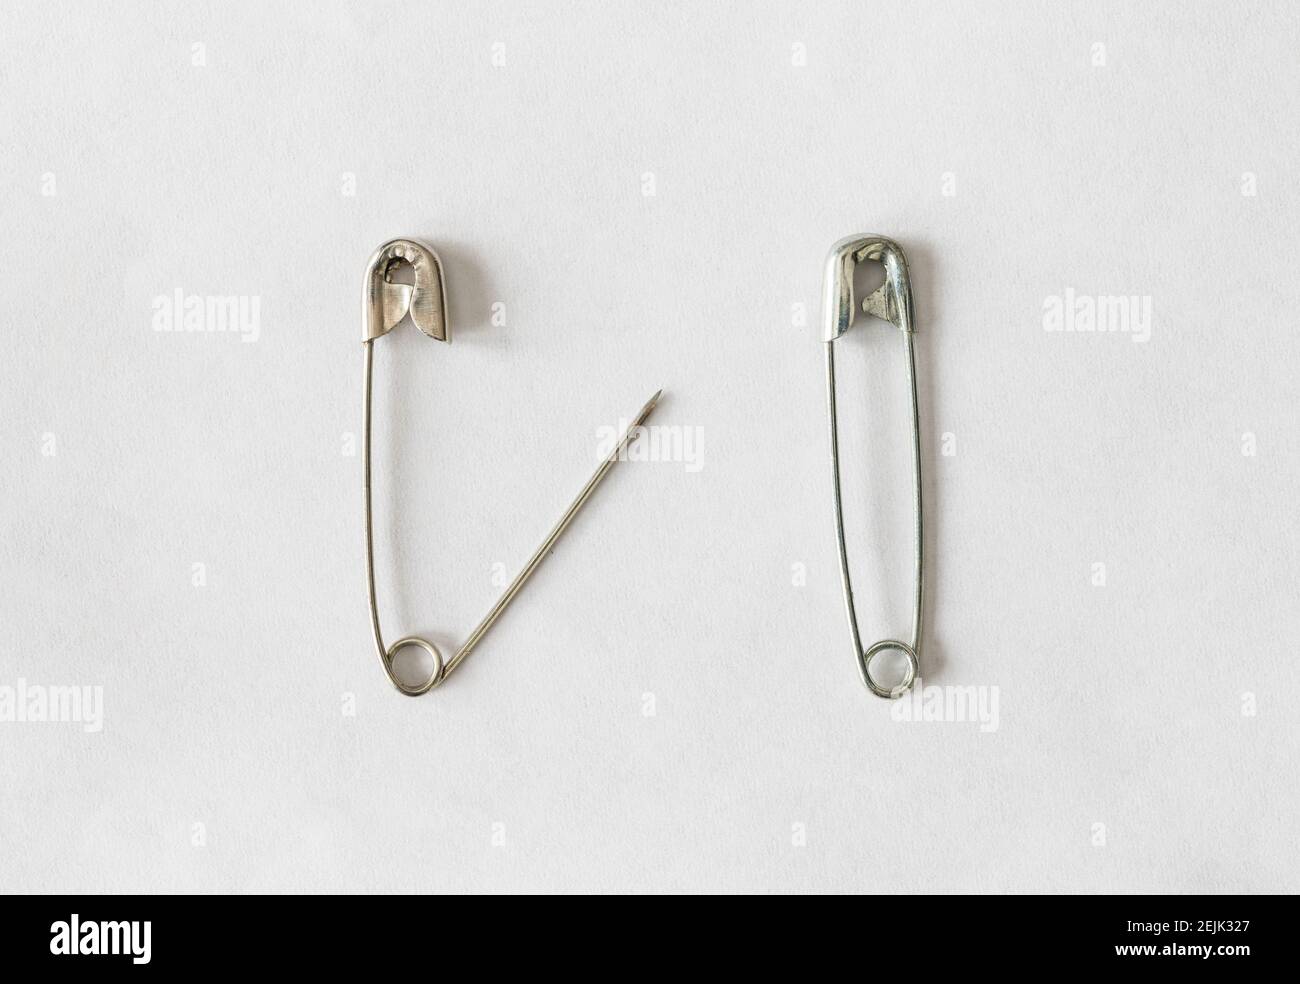 Two silver safety pins on white background, open safety pin on left, closed safety pin on right Stock Photo